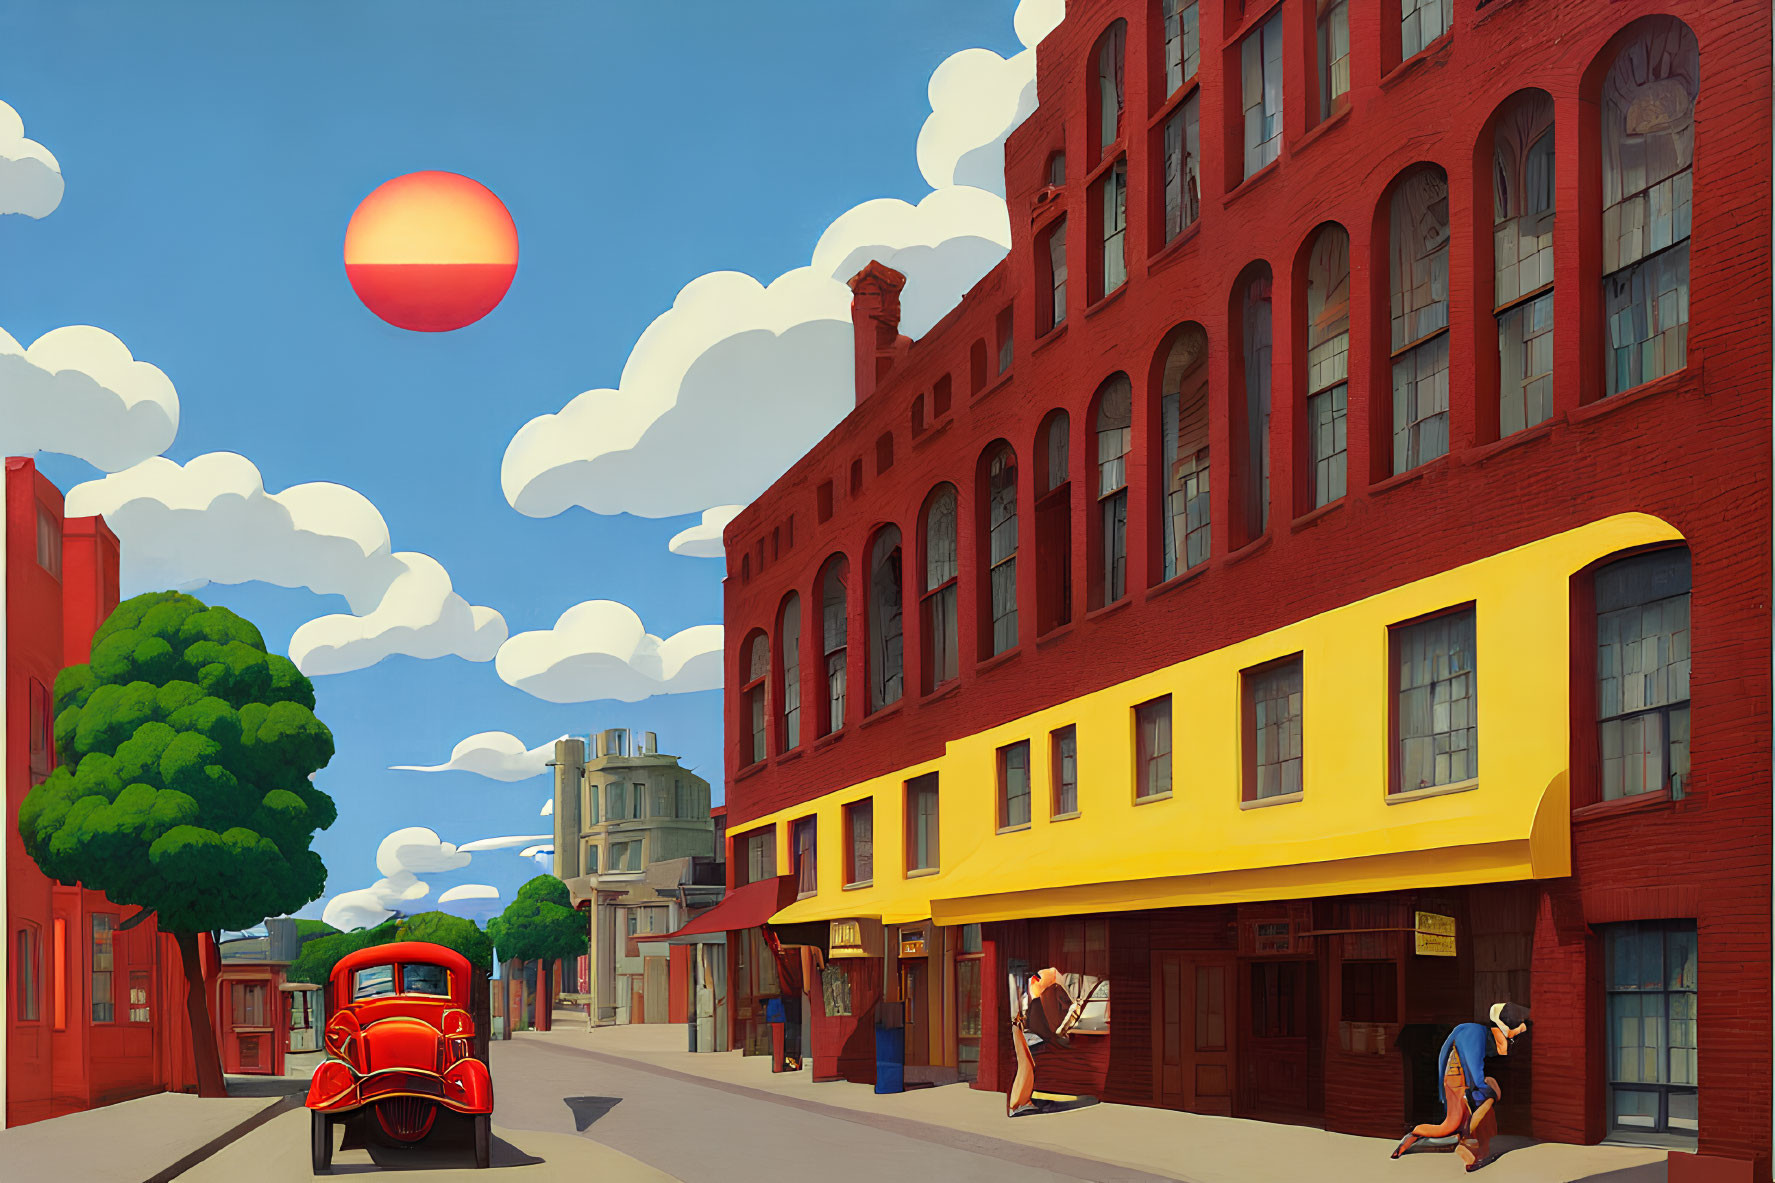 Colorful street scene with vintage car, pedestrians, brick buildings, blue sky, and large red sun